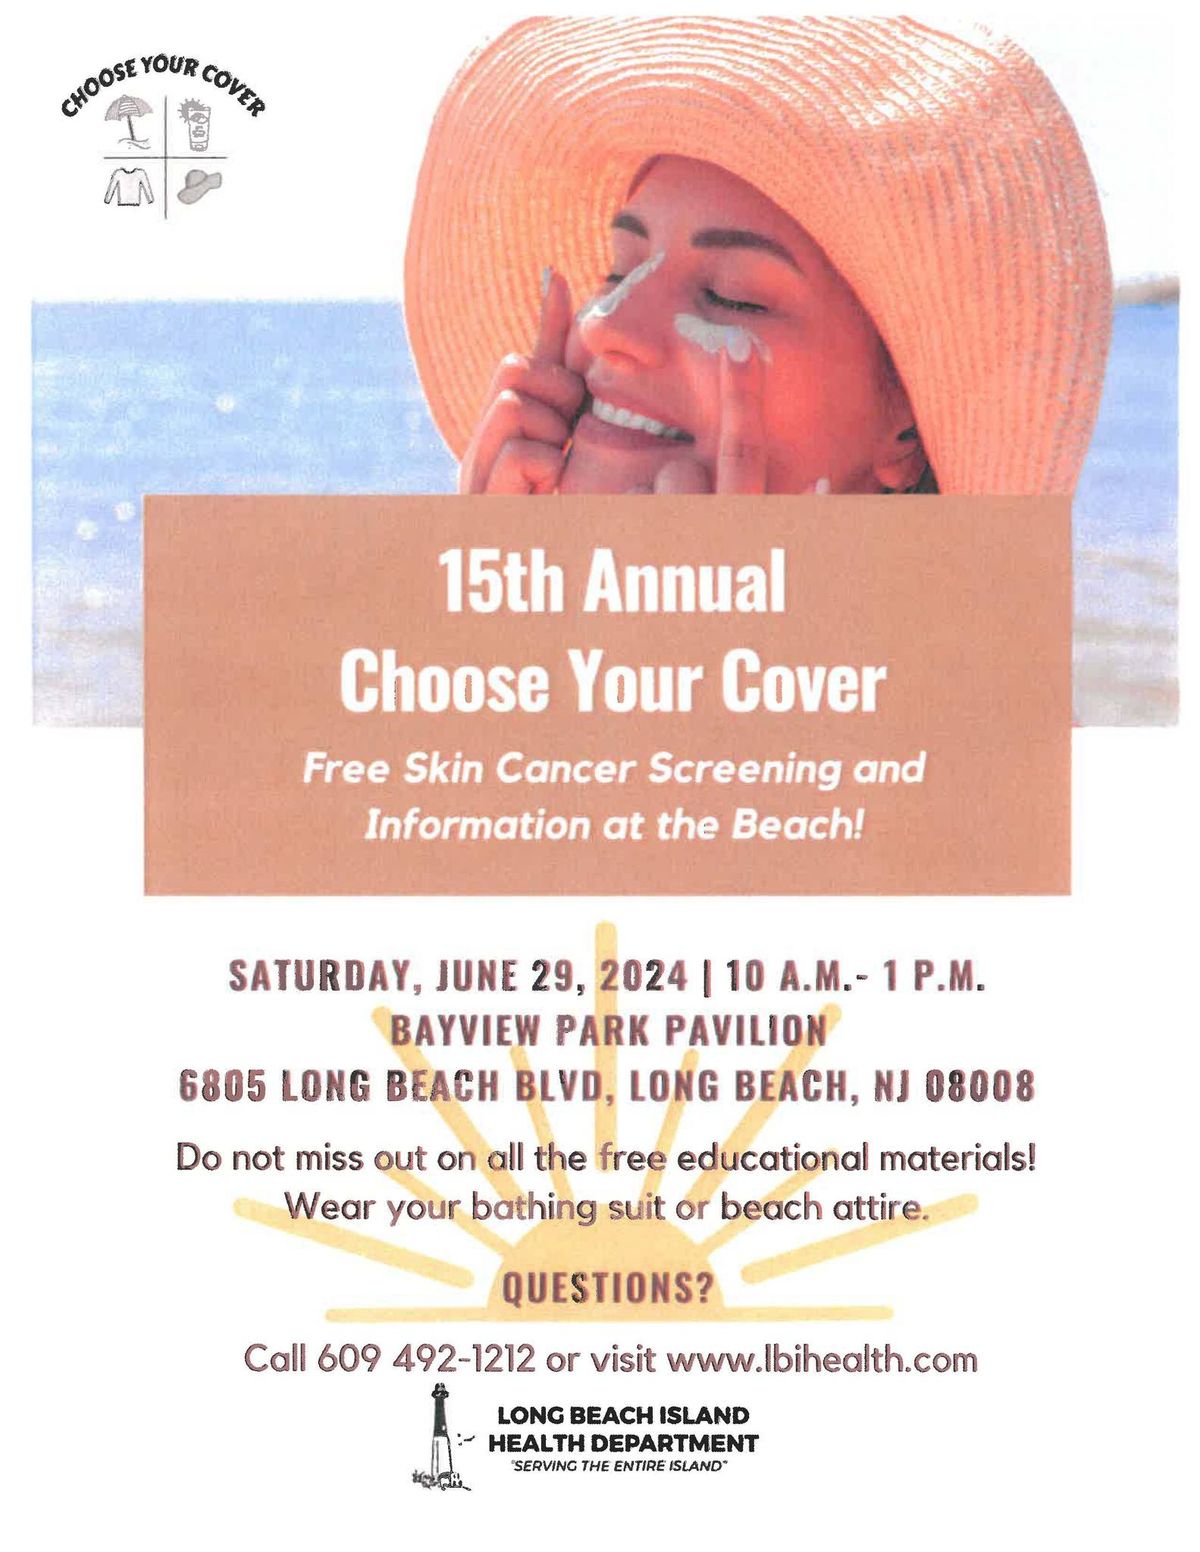 15th Annual Run For Cover Skin Cancer Screening